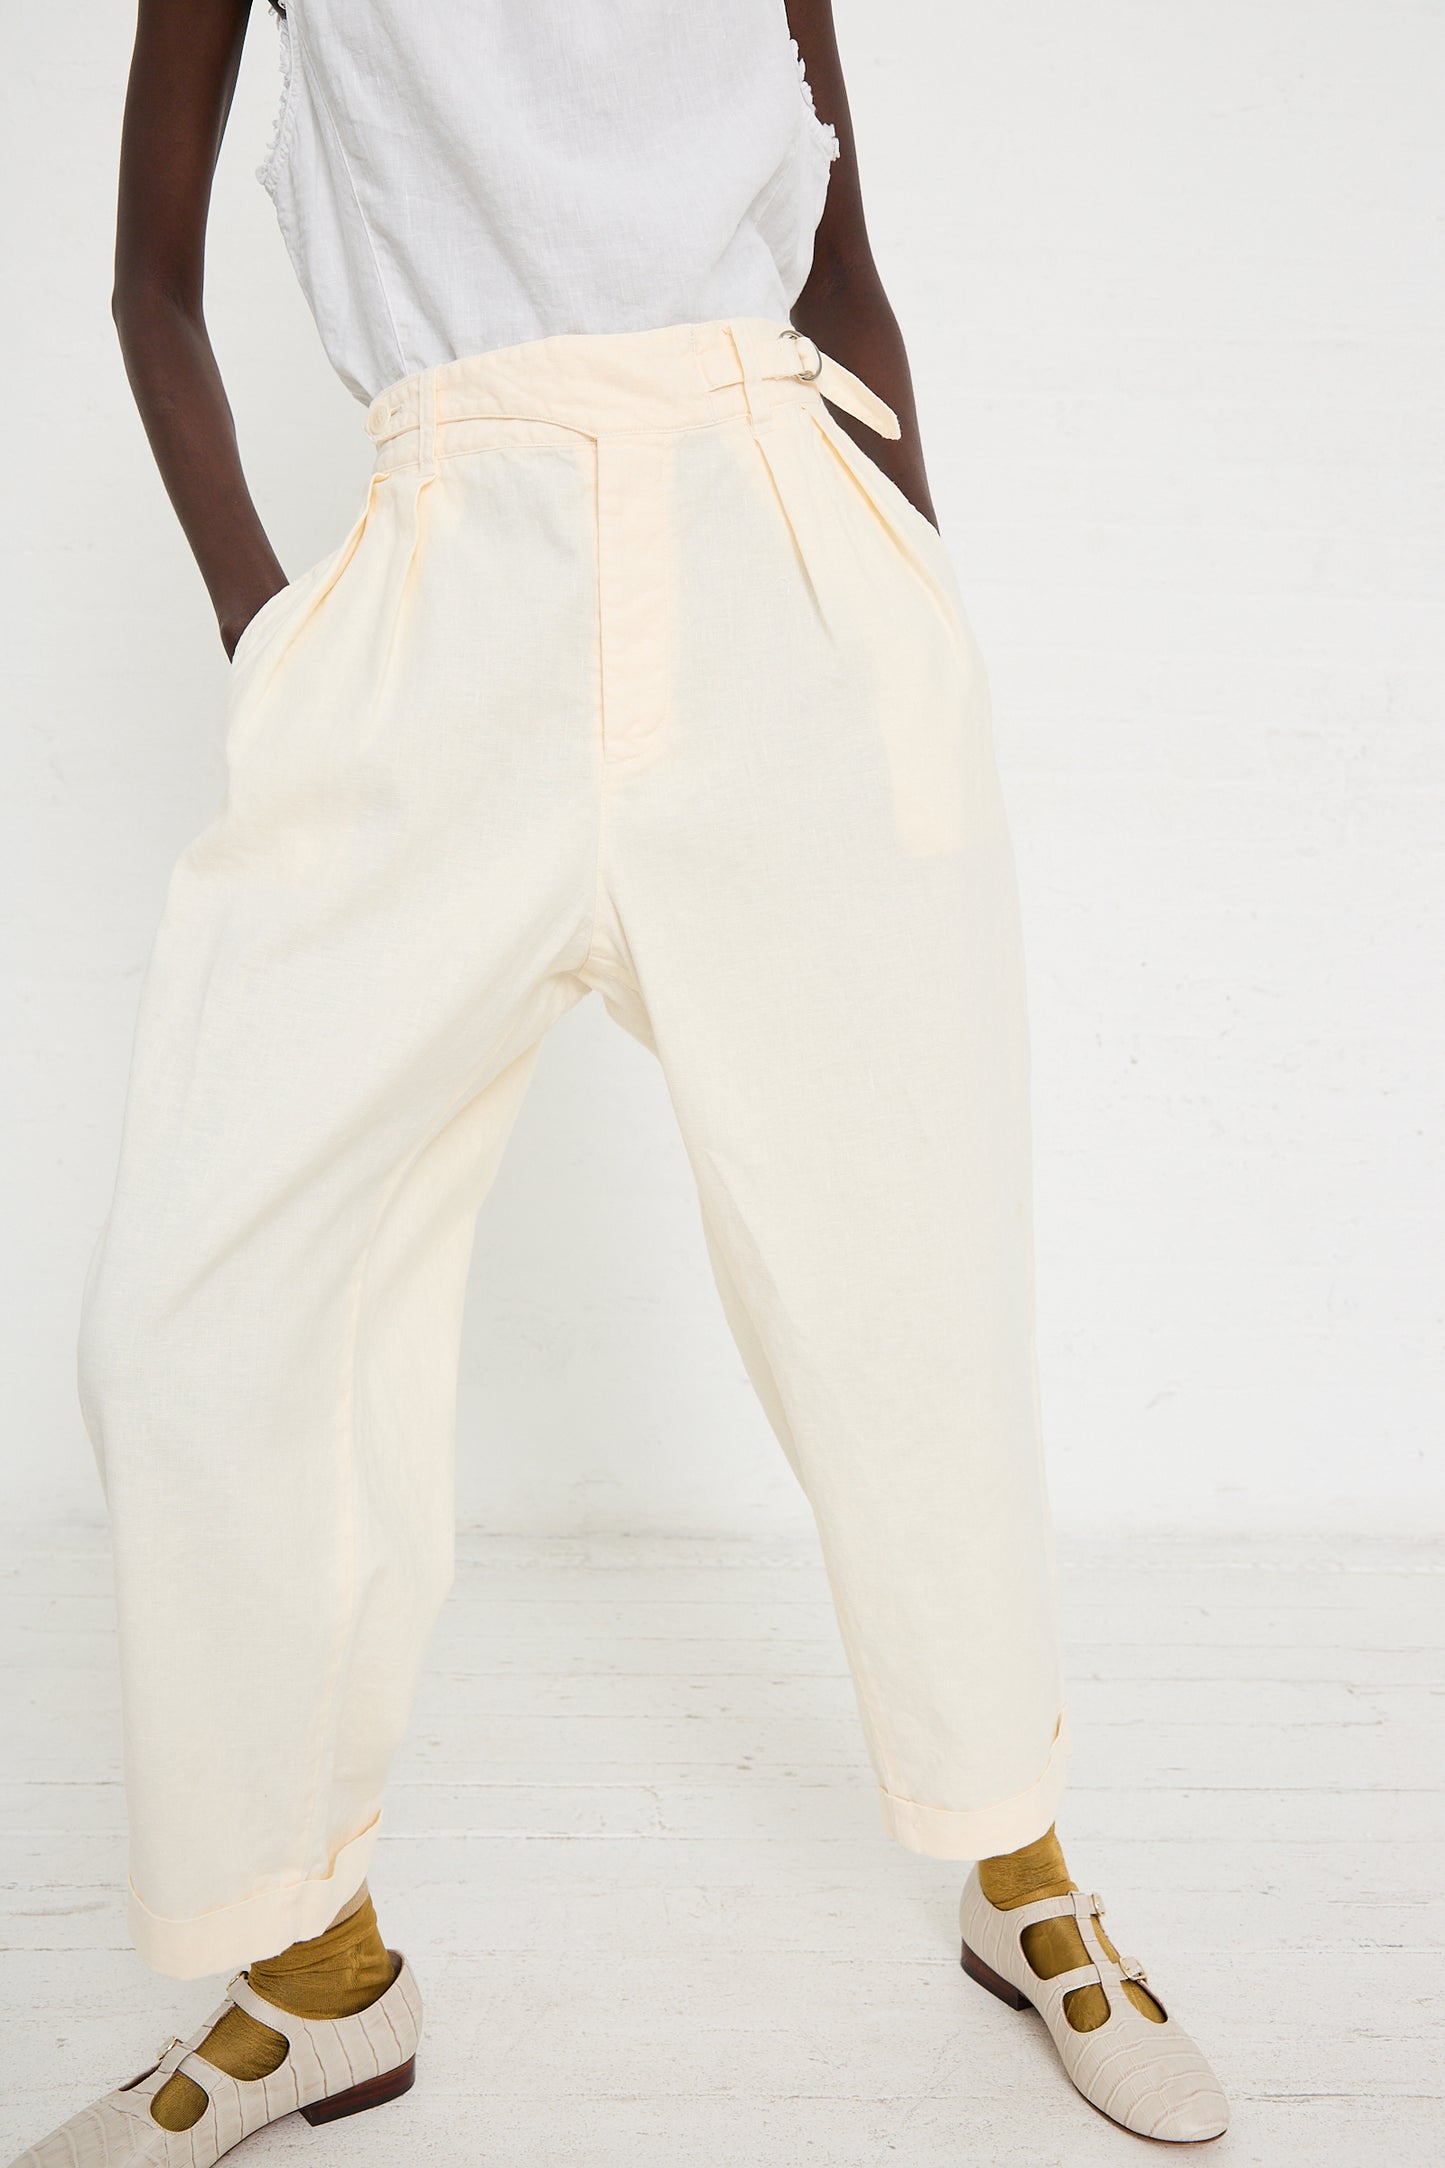 Person wearing light-colored, high-waisted Linen Cotton Blend Gurkah Pant in Off White by nest Robe with pleats and adjustable side tabs, a white top, yellow socks, and beige sandals. Standing against a white background.